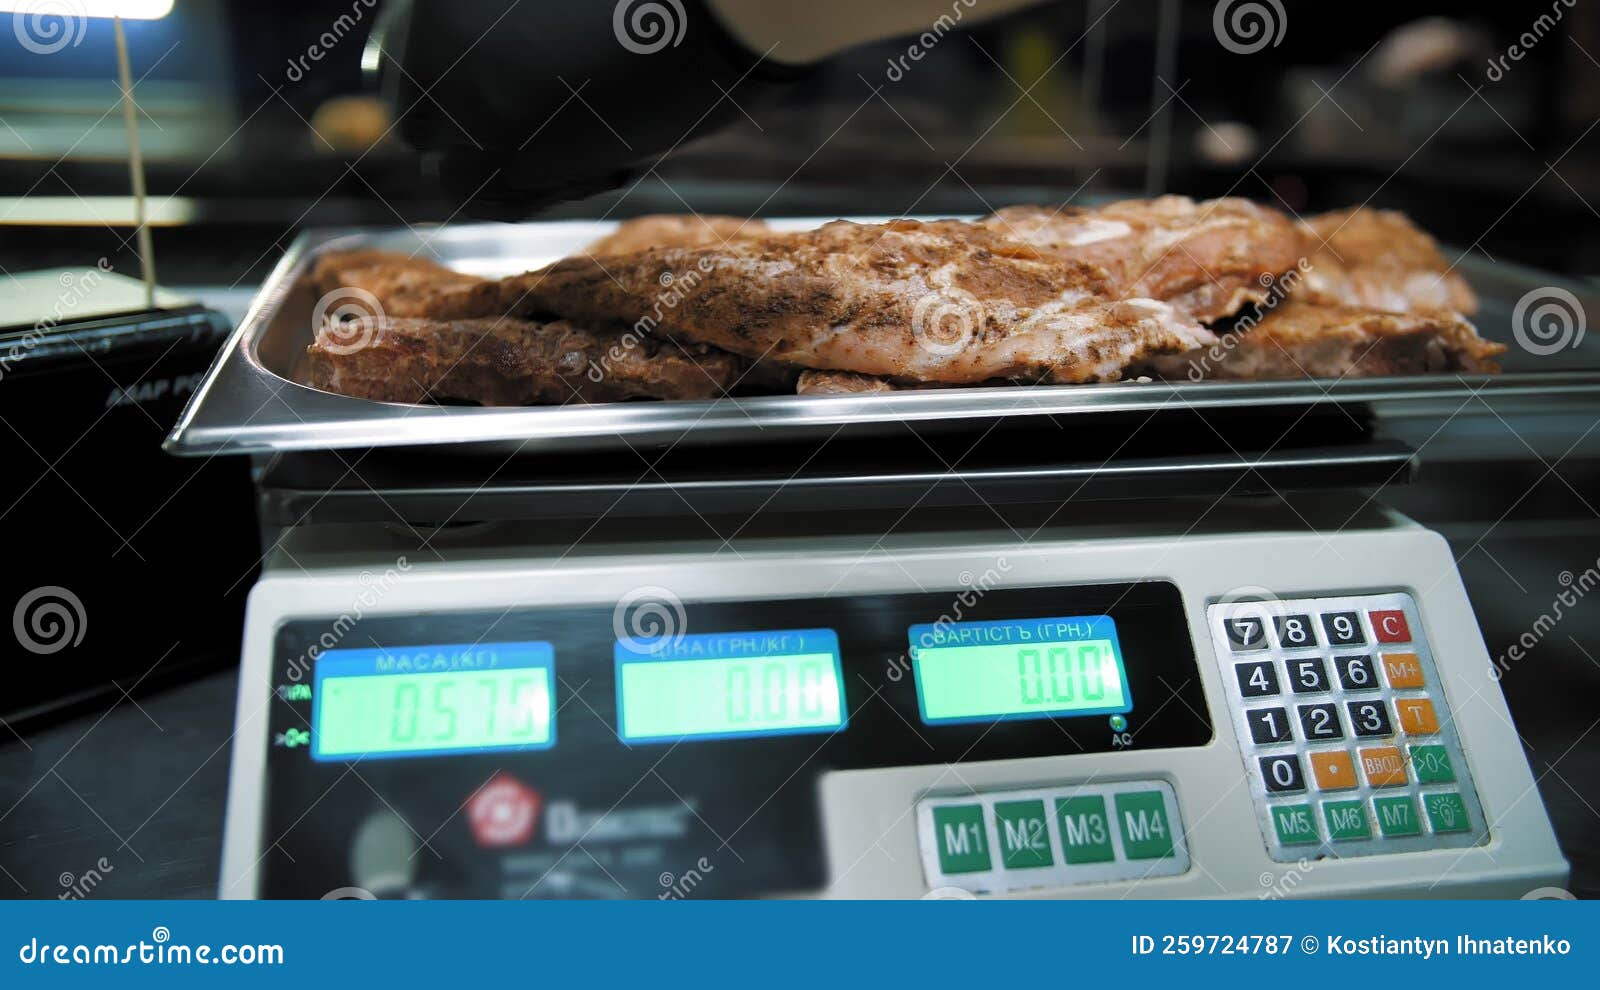 https://thumbs.dreamstime.com/z/kitchen-scales-close-up-meat-weighing-process-restaurant-process-weighing-meat-ribs-kitchen-scale-cooking-259724787.jpg